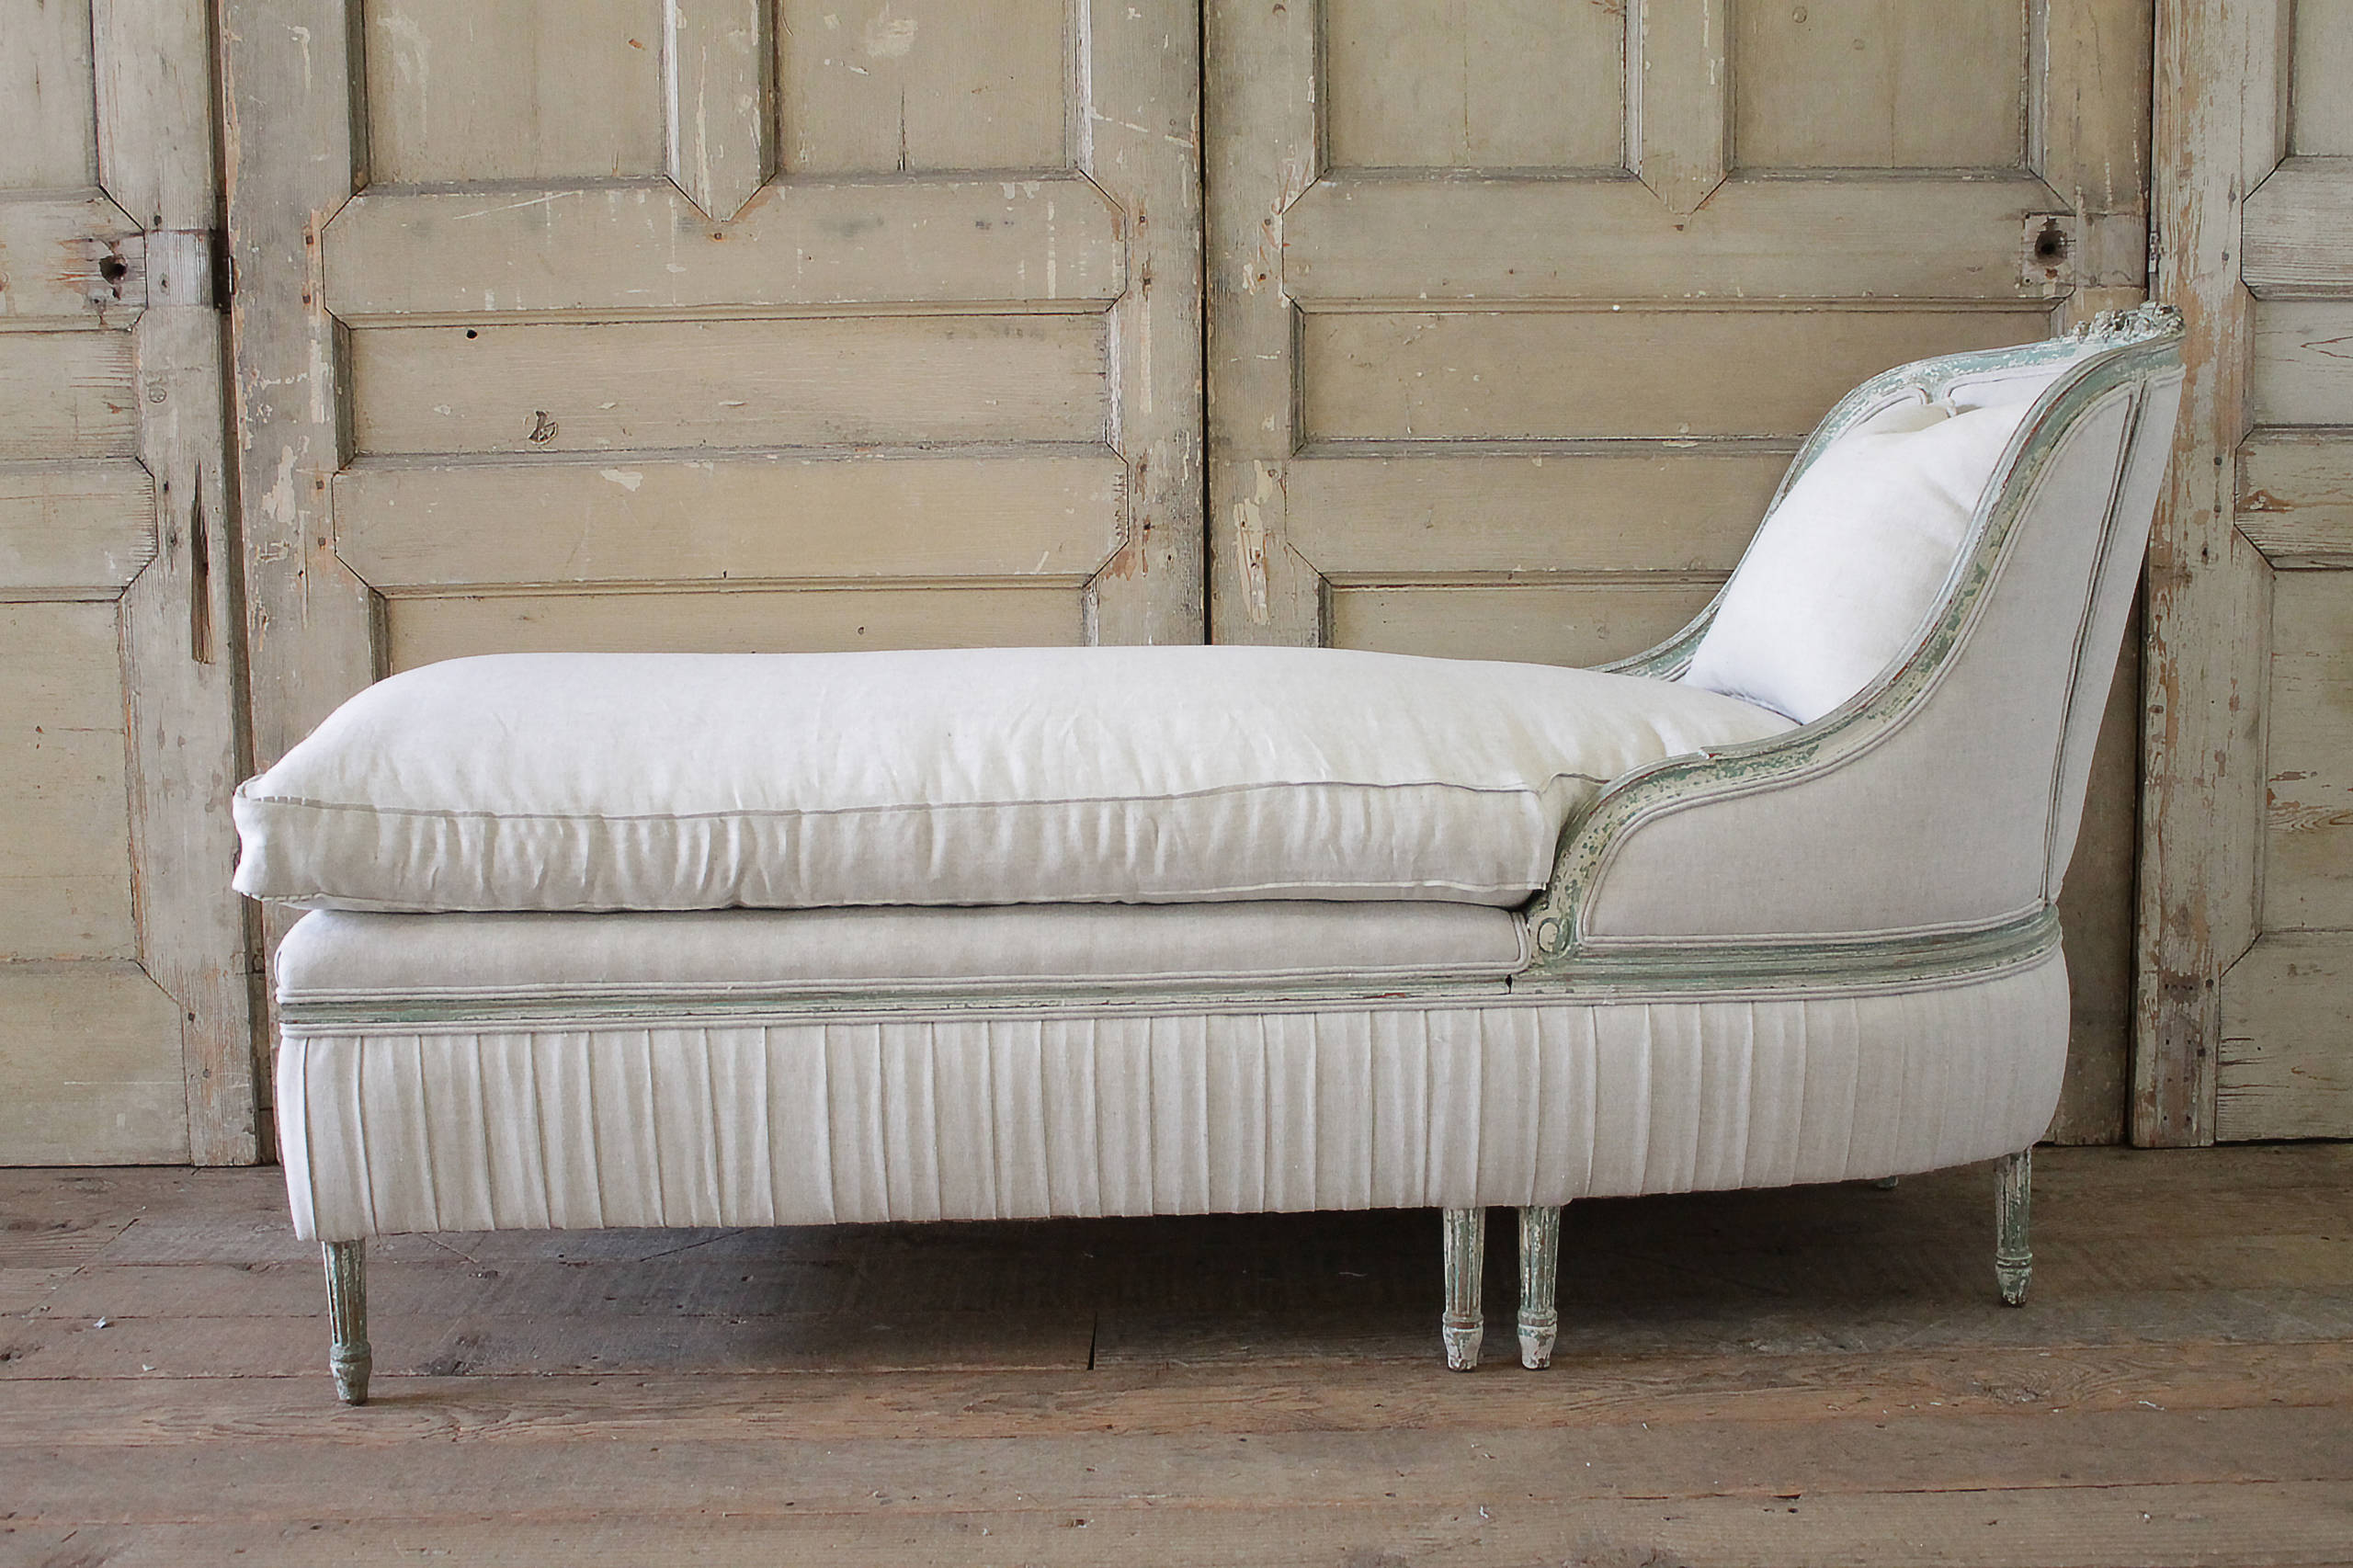 19th Century French Louis XVI Style Chaise Lounge - Farmhouse - Bedroom -  Orange County - by Full Bloom Cottage | Houzz